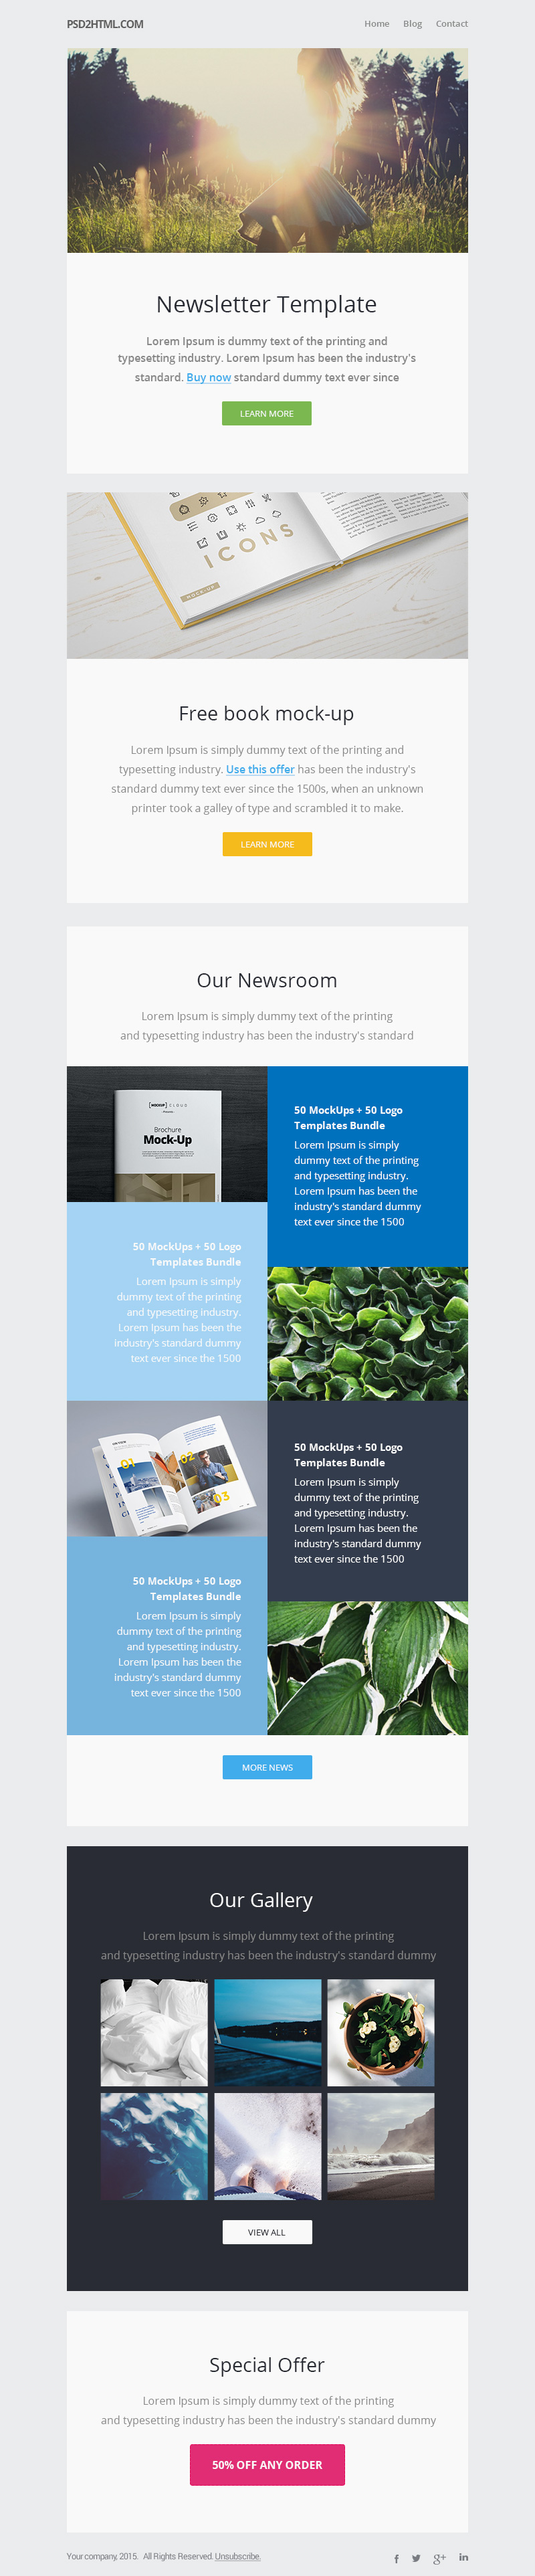 Download Free Newsletter Template Psd Html Graphicsfuel